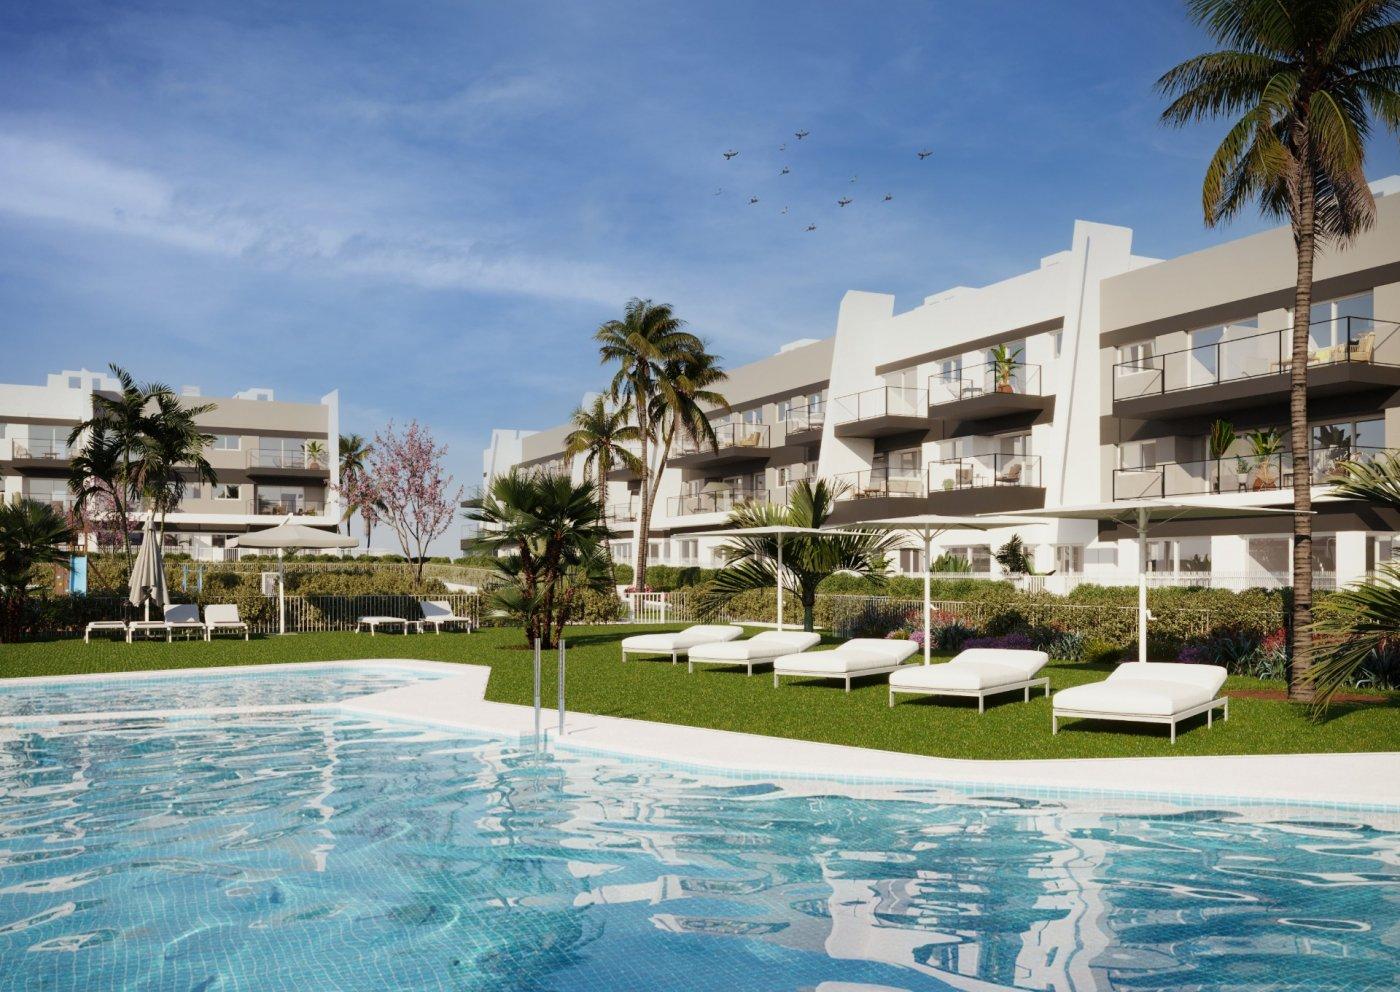 NEW BUILD APARTMENTS IN GRAN ALACANT

 New Build development of120 apartments in Gran Alacant.

 Residential complex located very close to the natural park of Clot de Galvany, and a short distance from the beaches of Carabassí.

 Apartments with 2 and 3 bedrooms, 2 bathrooms have a carefully designed distribution and enjoy beautiful views of the communal areas, the natural environment or the sea, and the pool and private gardens at the development.

 These new apartments are built to a very high standard and form a lovely residential with pools, private underground parking, storeroom, garden areas, and a children’s play area.

 Gran Alacant in perfect located between the towns of El Altet and Santa Pola and the stunning sand dune beaches.

 Gran Alacant is a fast developing town located between Santa Pola and Alicante and consists of about 25 urbanisations, or individual areas, just 10 minutes drive south of Alicante Airport and has two of the Costa Blancas most beautiful beaches - the Carabassi.

 Gran Alacant is a tranquil place to live or spend your holidays with very little traffic and contains all you would need for a relaxing holiday.